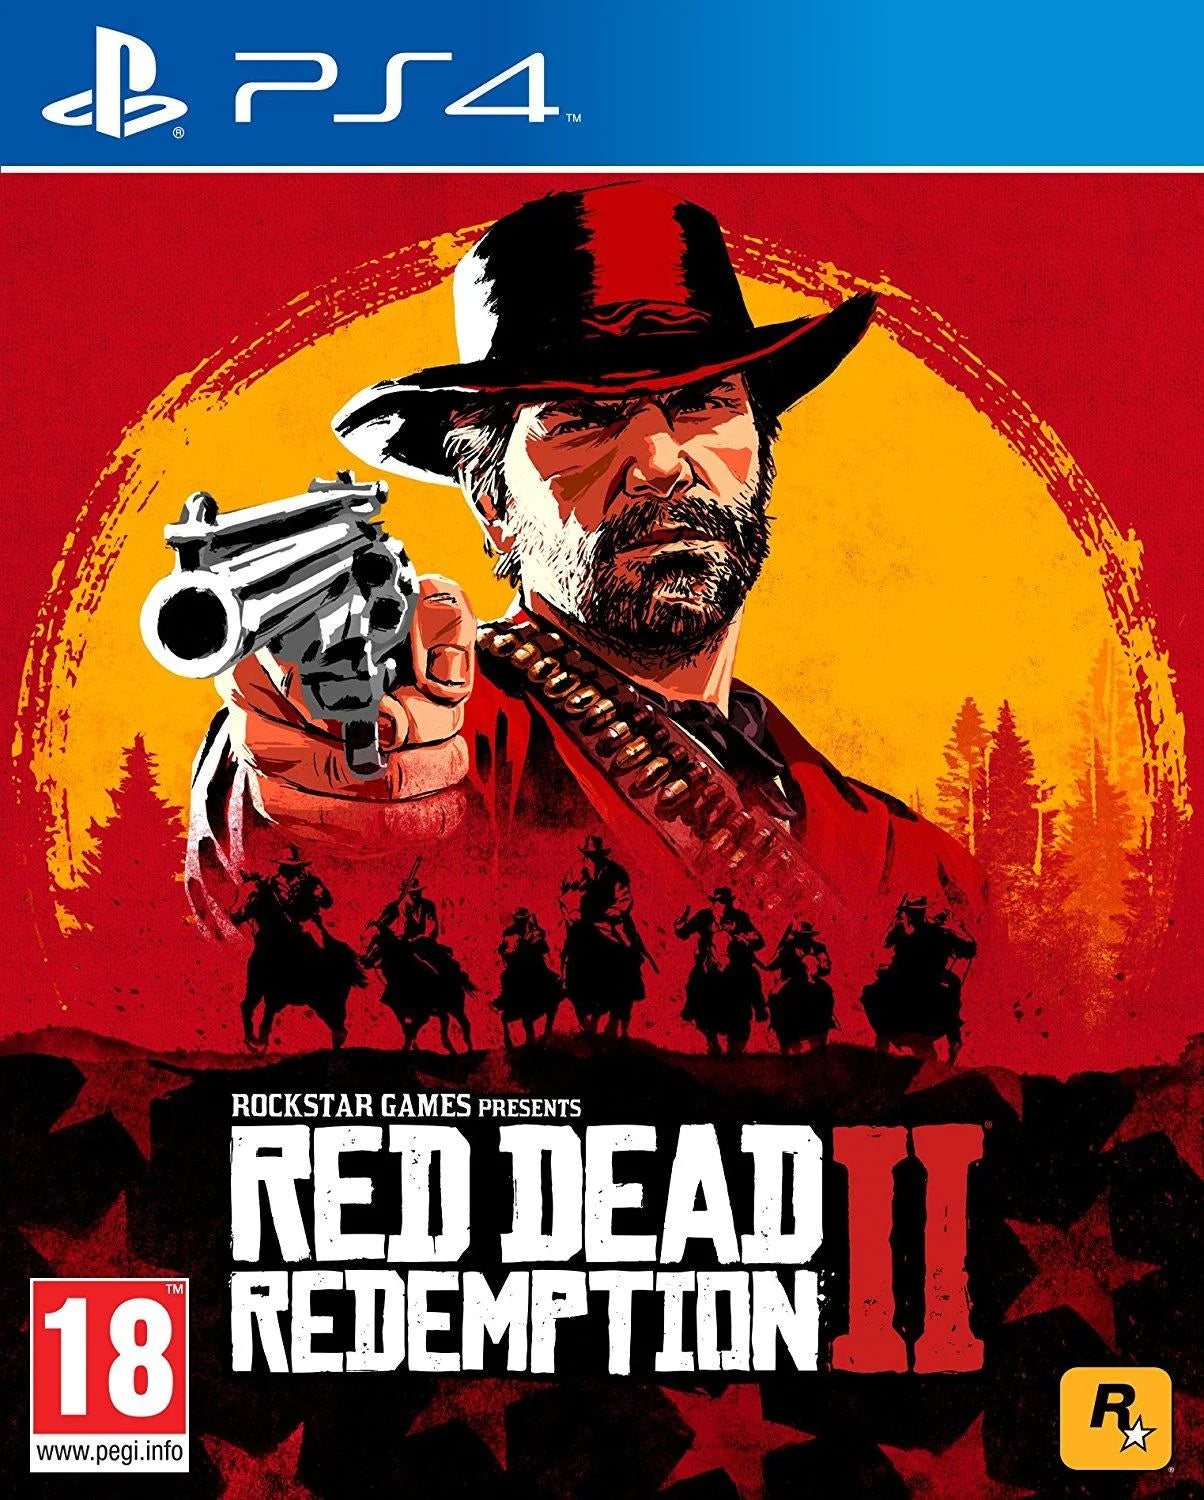 Playstation 4: Red Dead Redemption 2